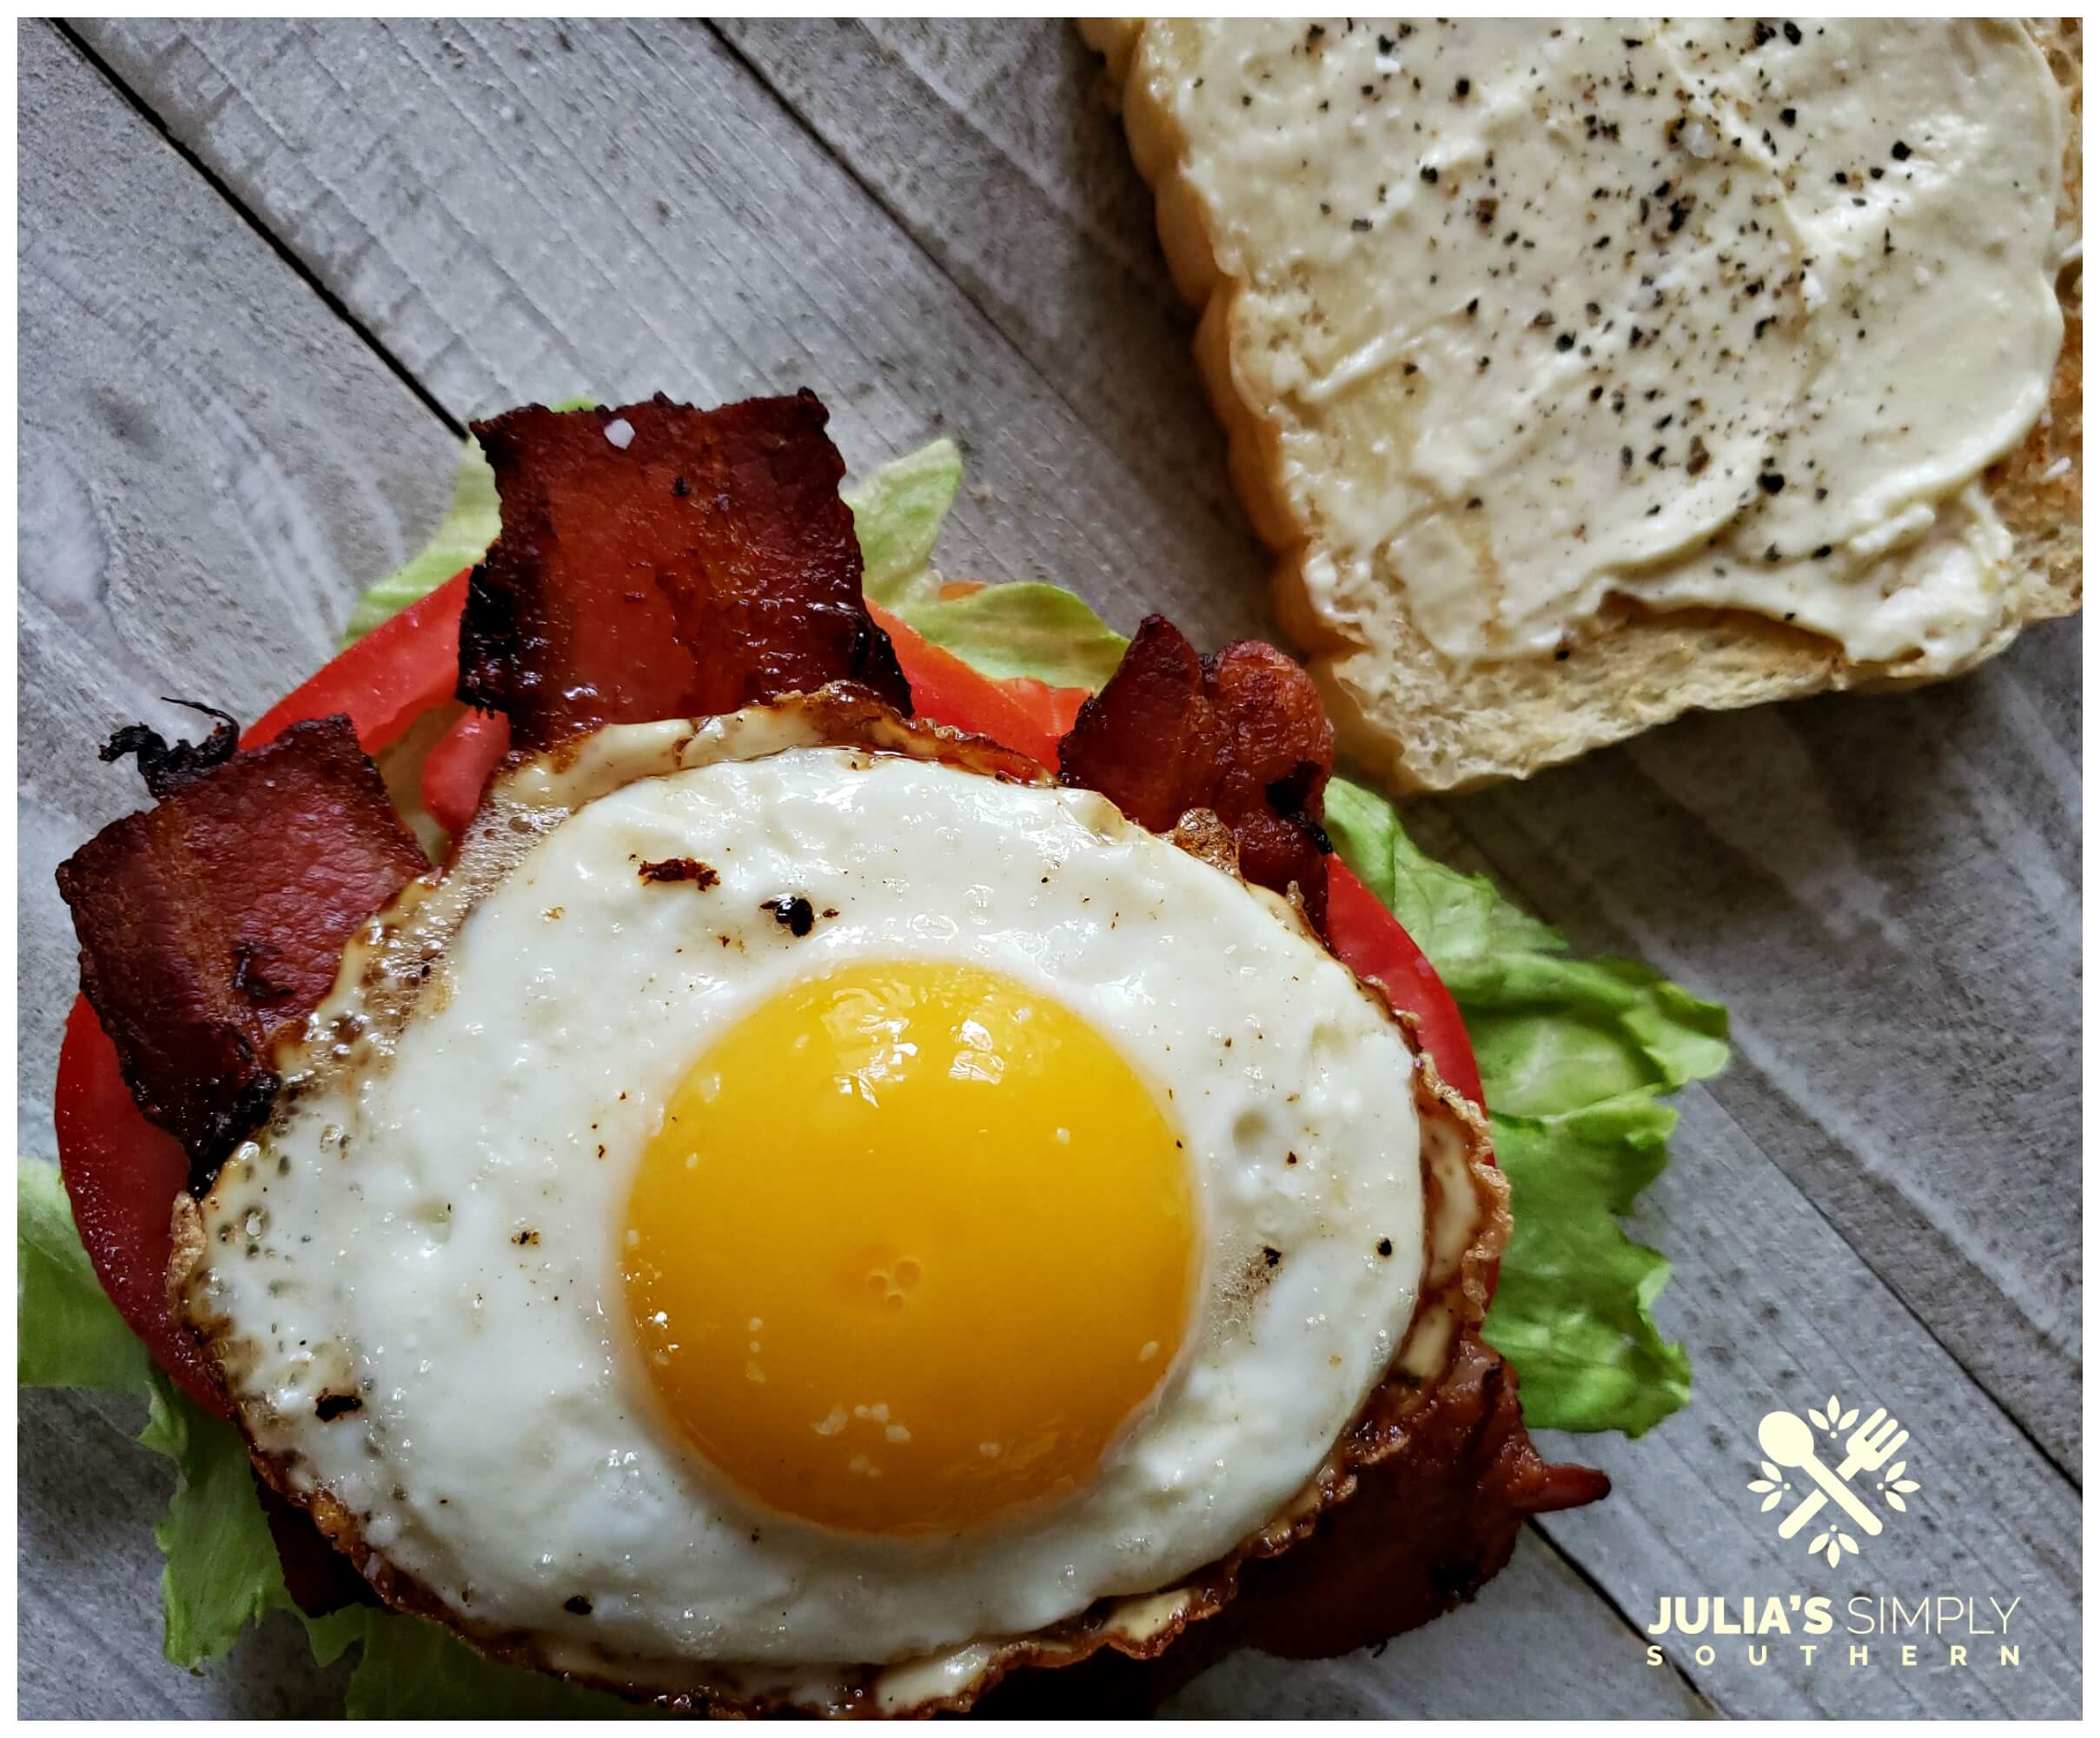 Best BLT Sandwich Recipe. A breakfast BLT is the ultimate in classic delicious sandwiches. Enjoy it anytime of the day and especially at breakfast with a runny yolk fried egg.